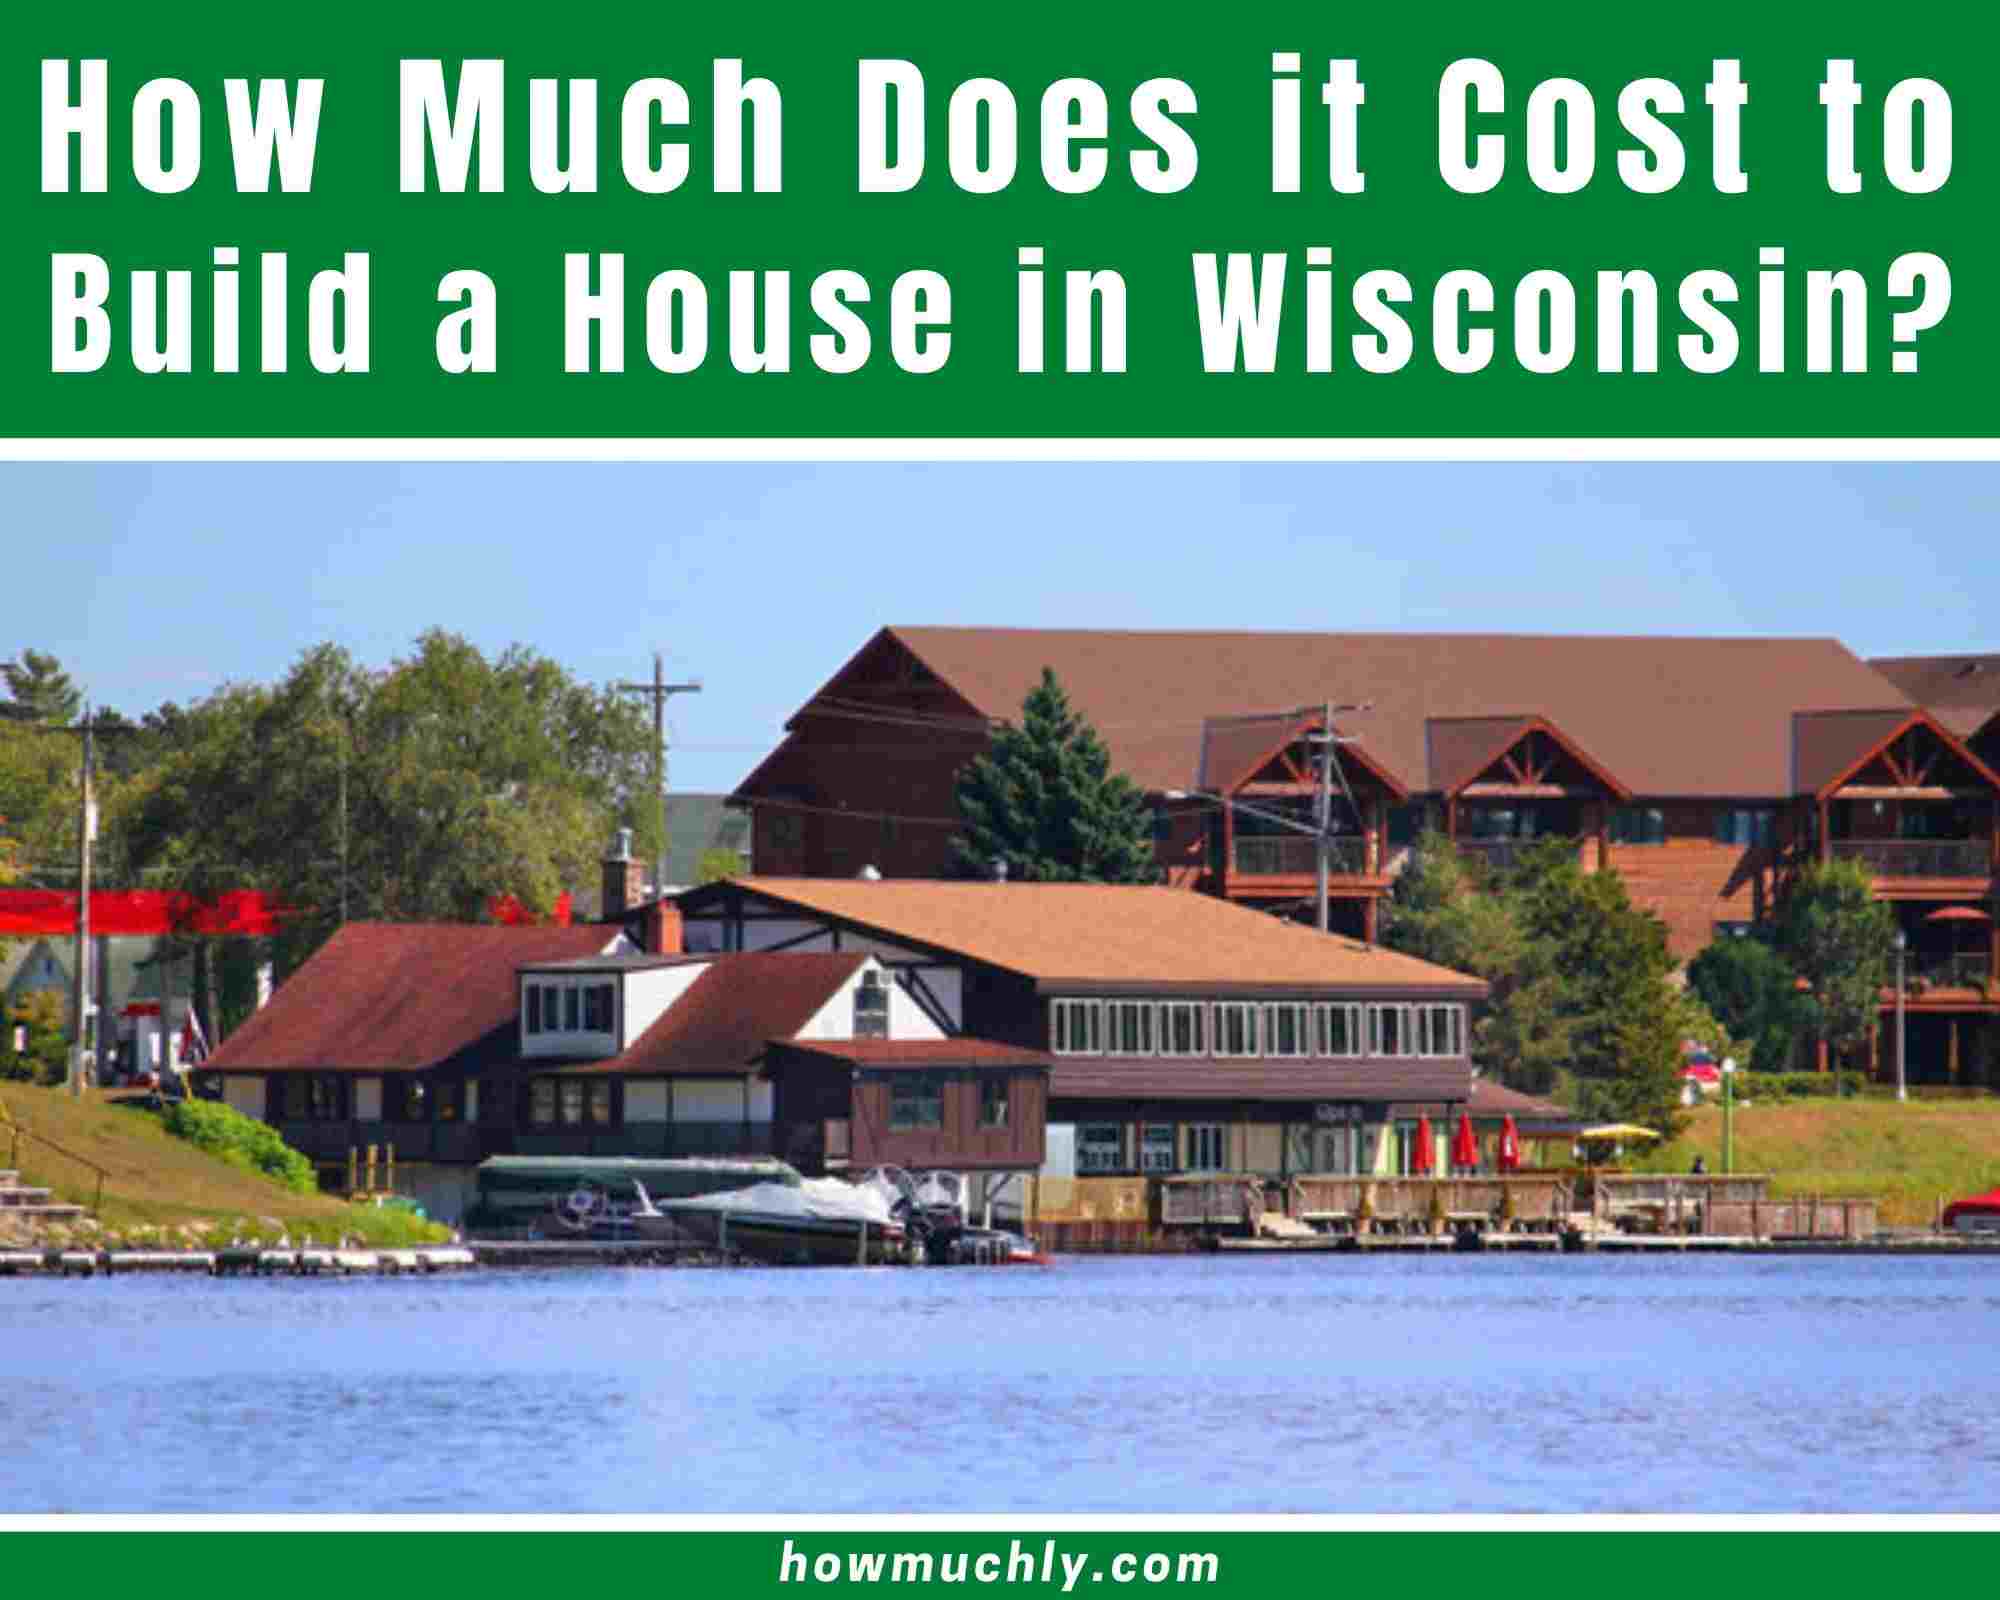 Cost to build a house wisconsin kobo building